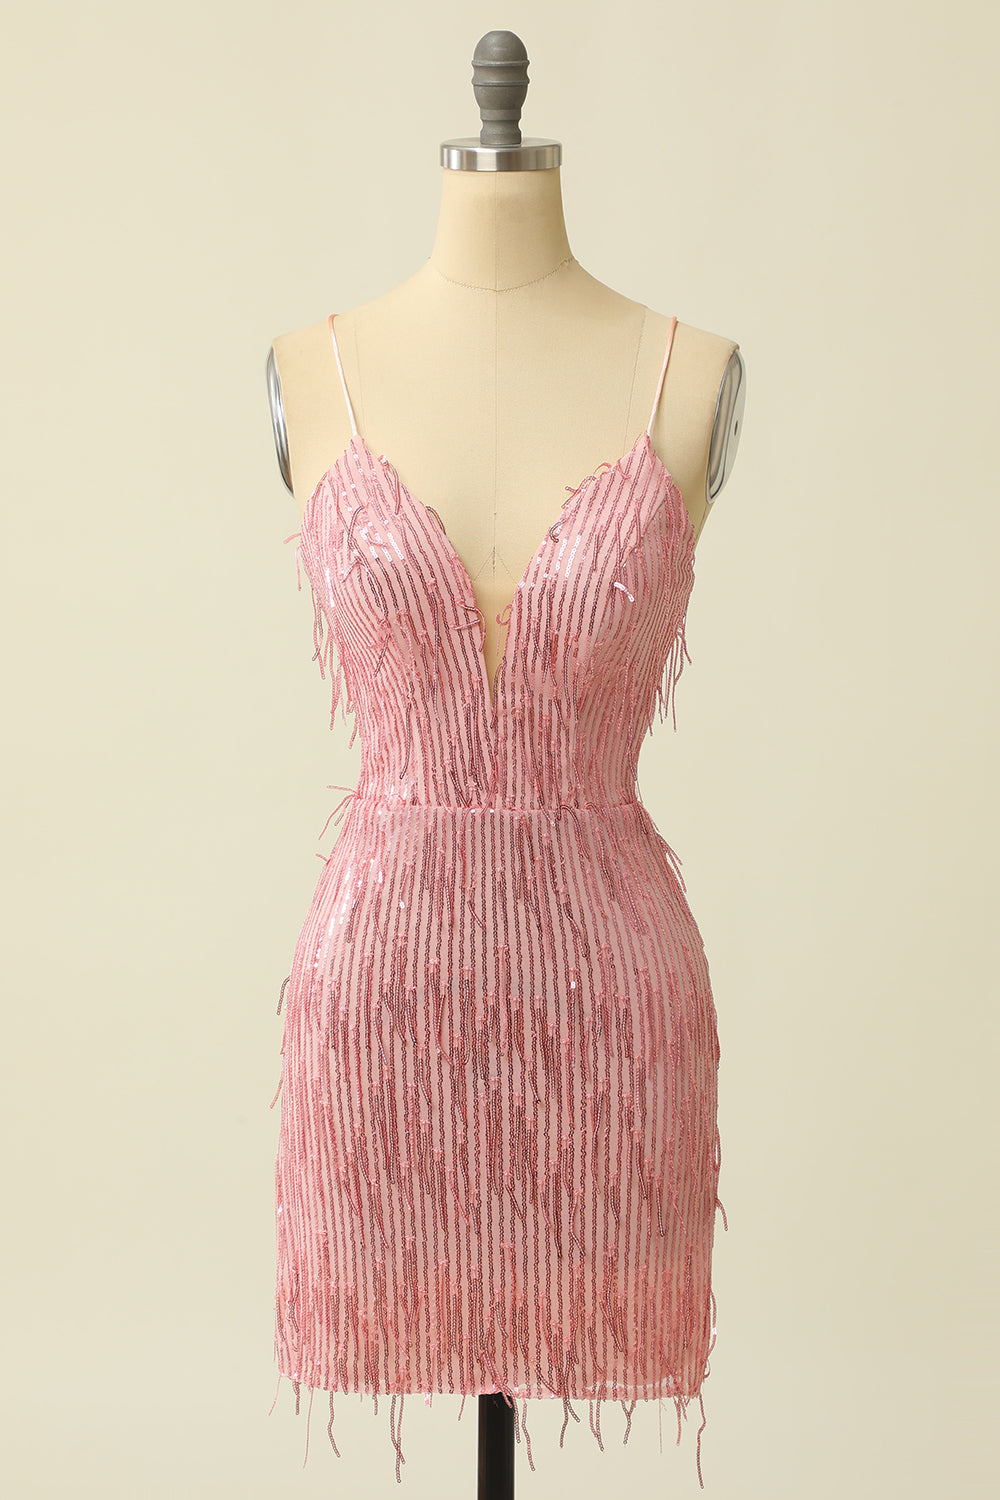 Pink Spaghetti Straps Bodycon Homecoming Dress With Feathers